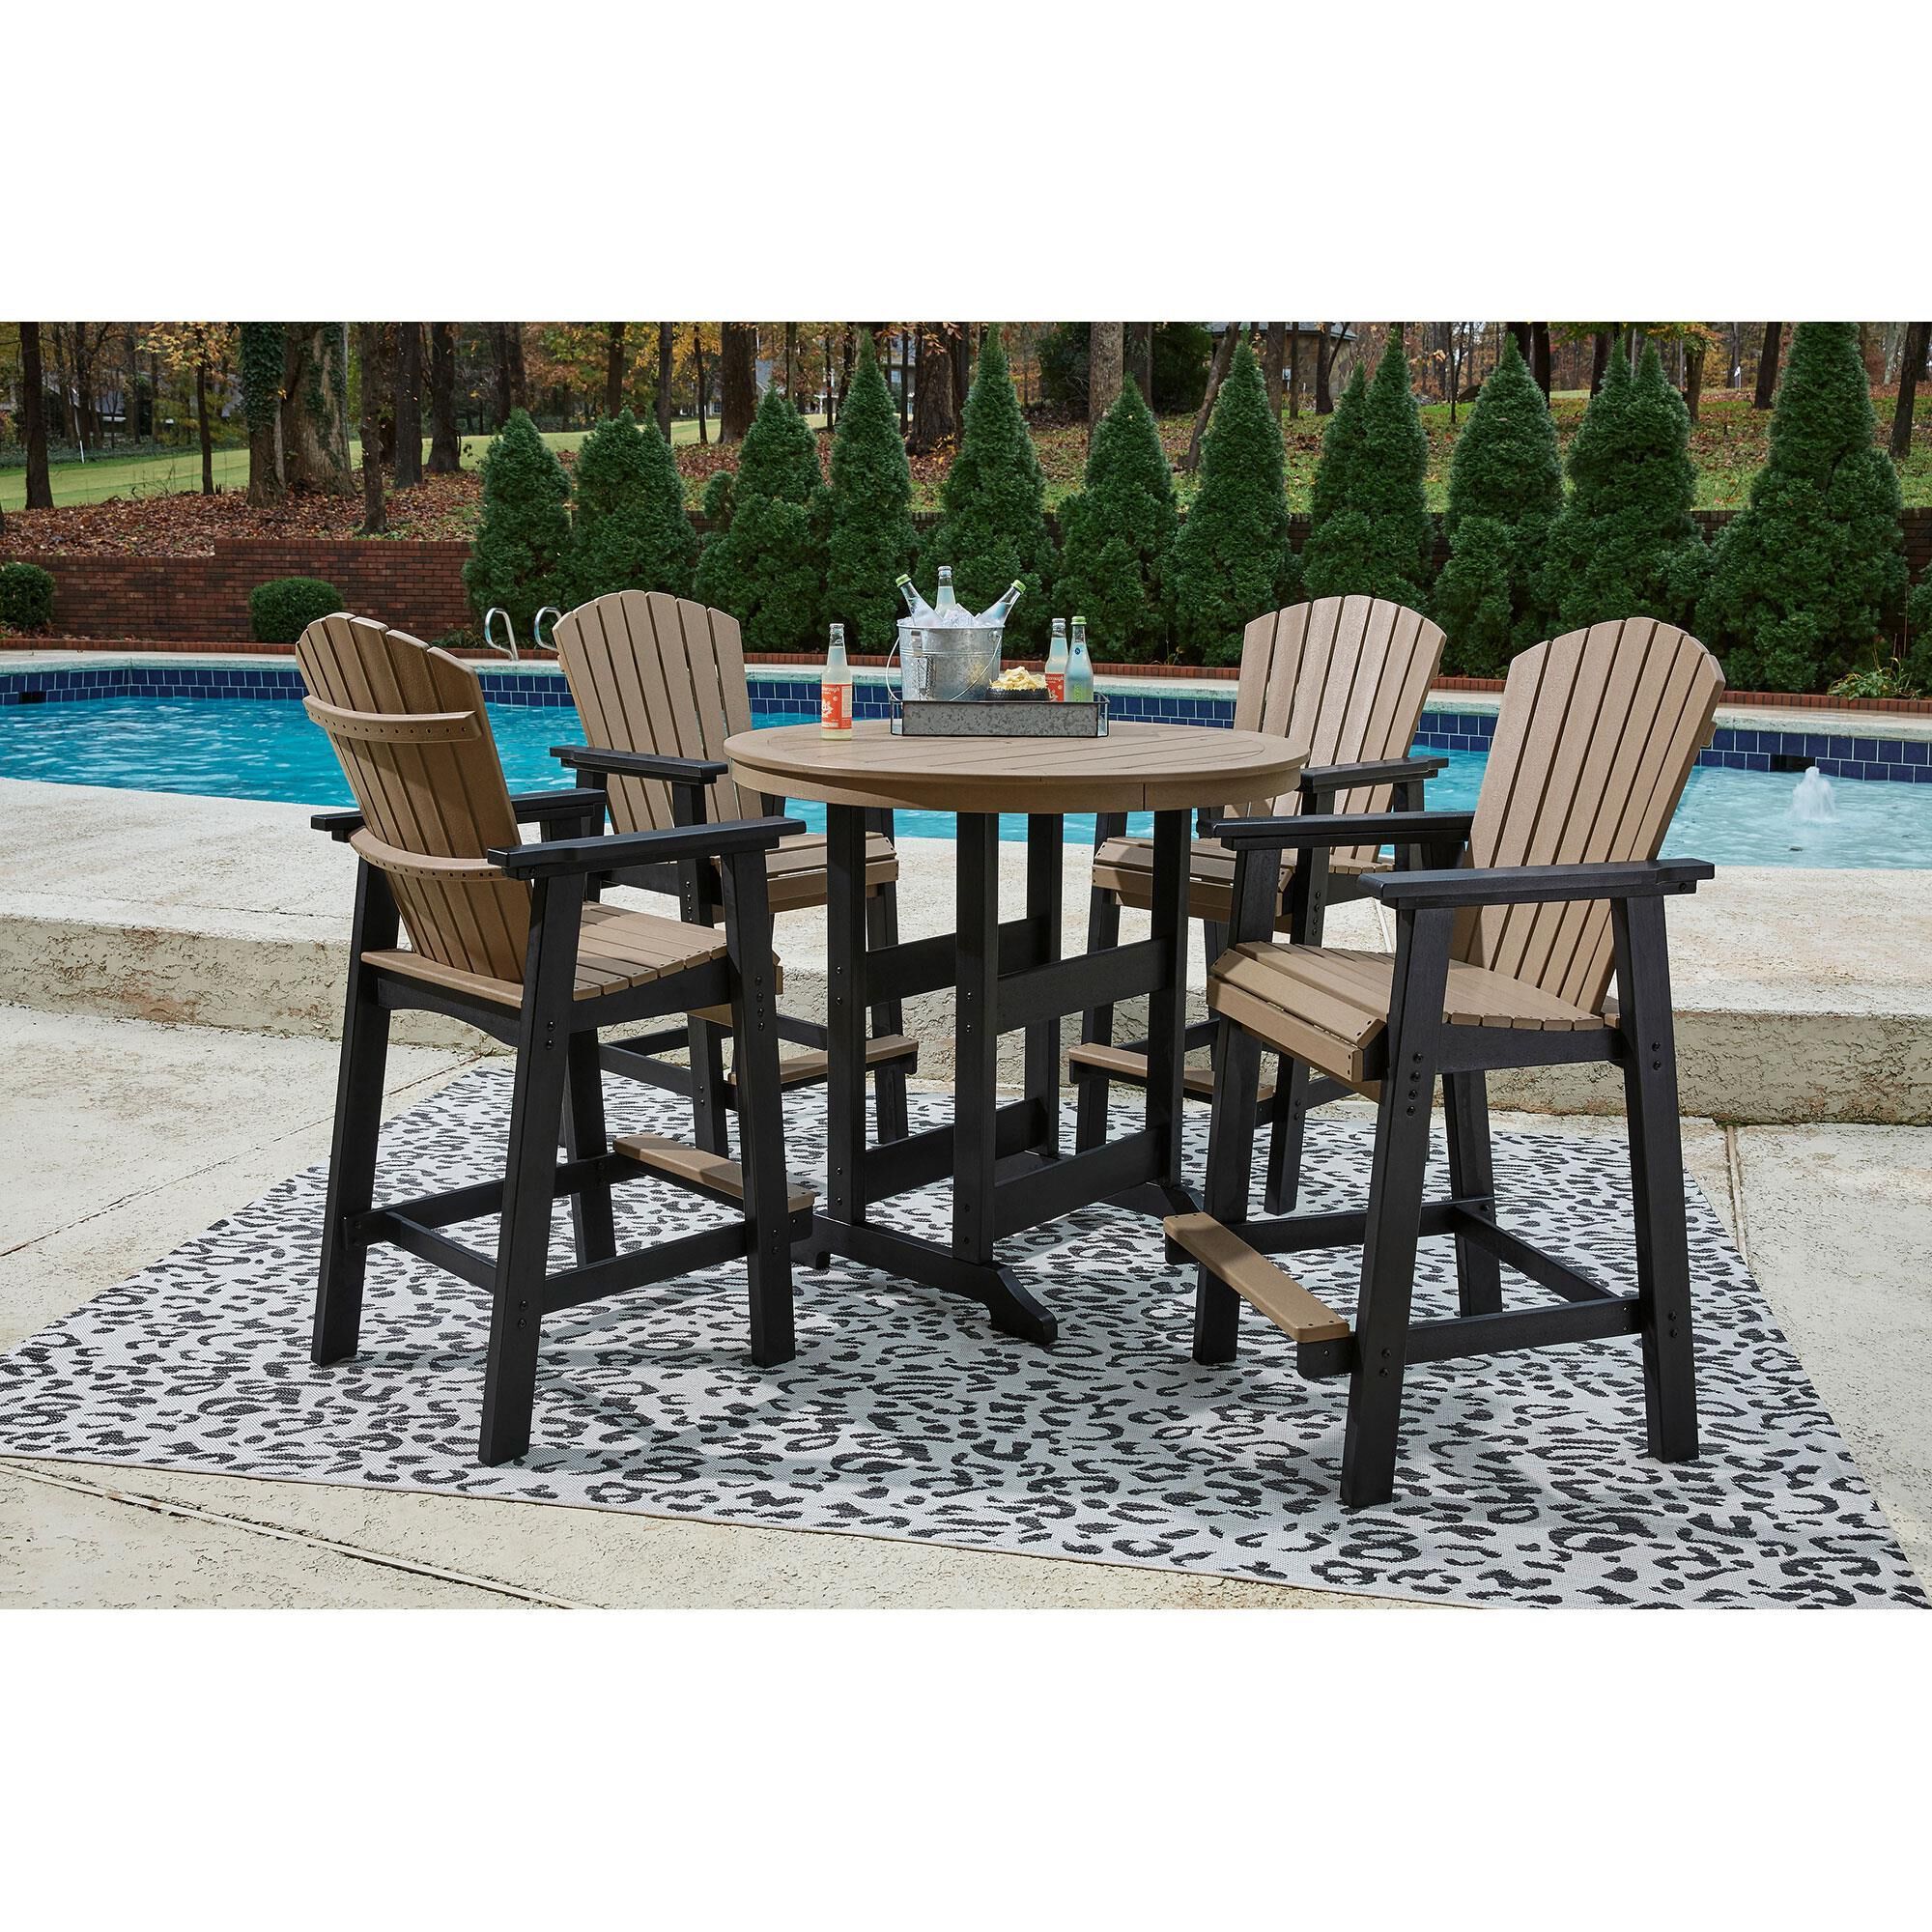 The Perfect Addition to Your Outdoor Entertainment Space: Outdoor Bar Sets